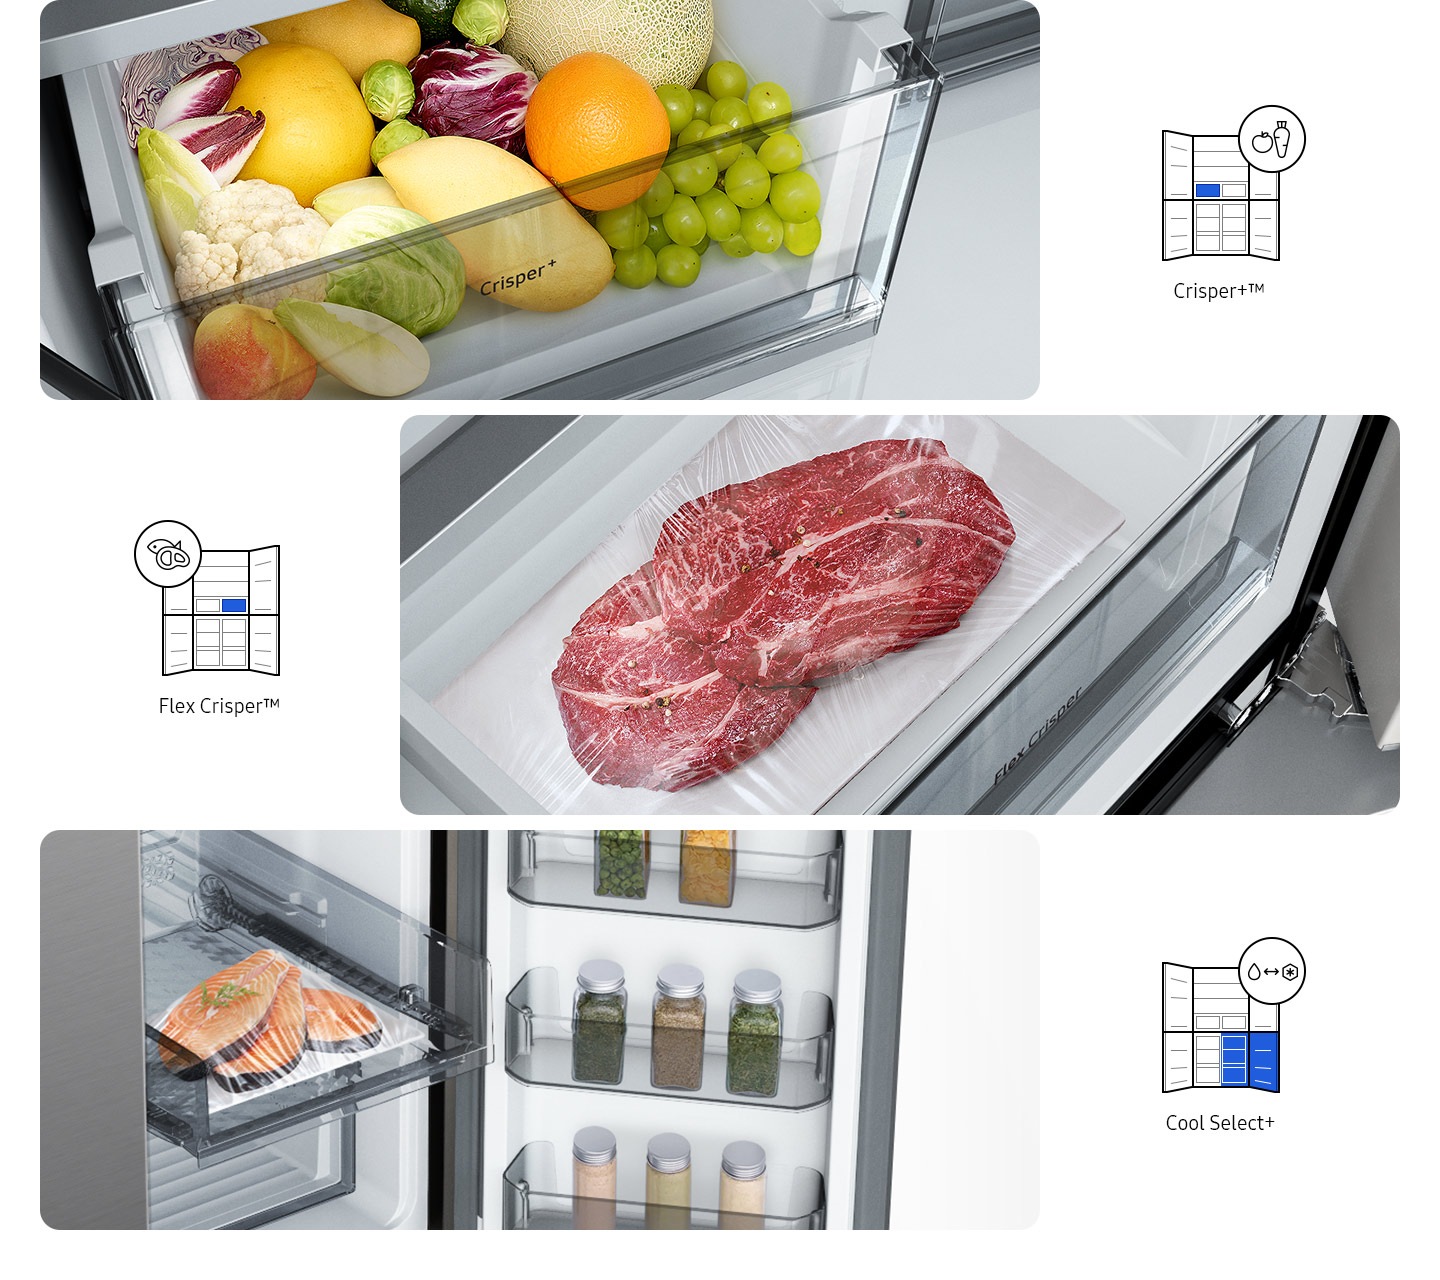 The Crisper+ drawer, in the upper left part of the fridge, is filled with different fruits, while Flex Crisper, in the upper right, is holding two seasoned steak. On the bottom right of the fridge is the Cool Select+, which has three pieces of salmon.